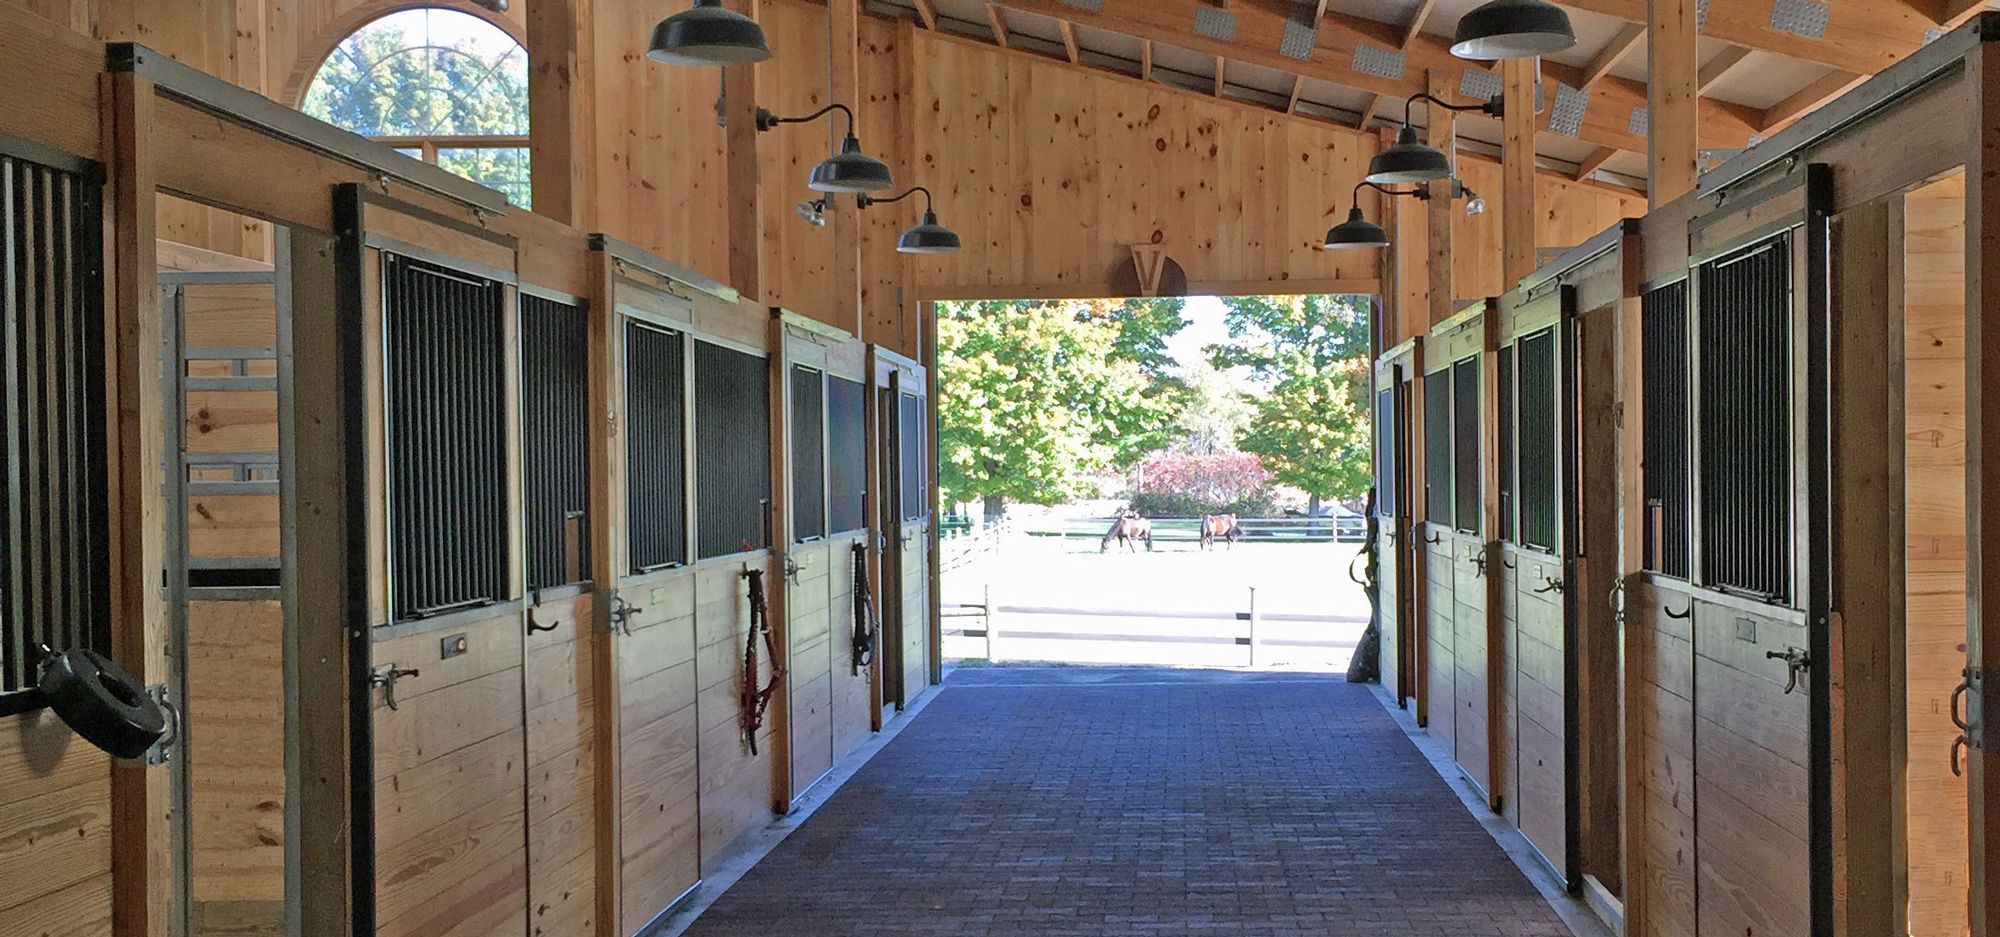 Our brand new 16 stall horse barn